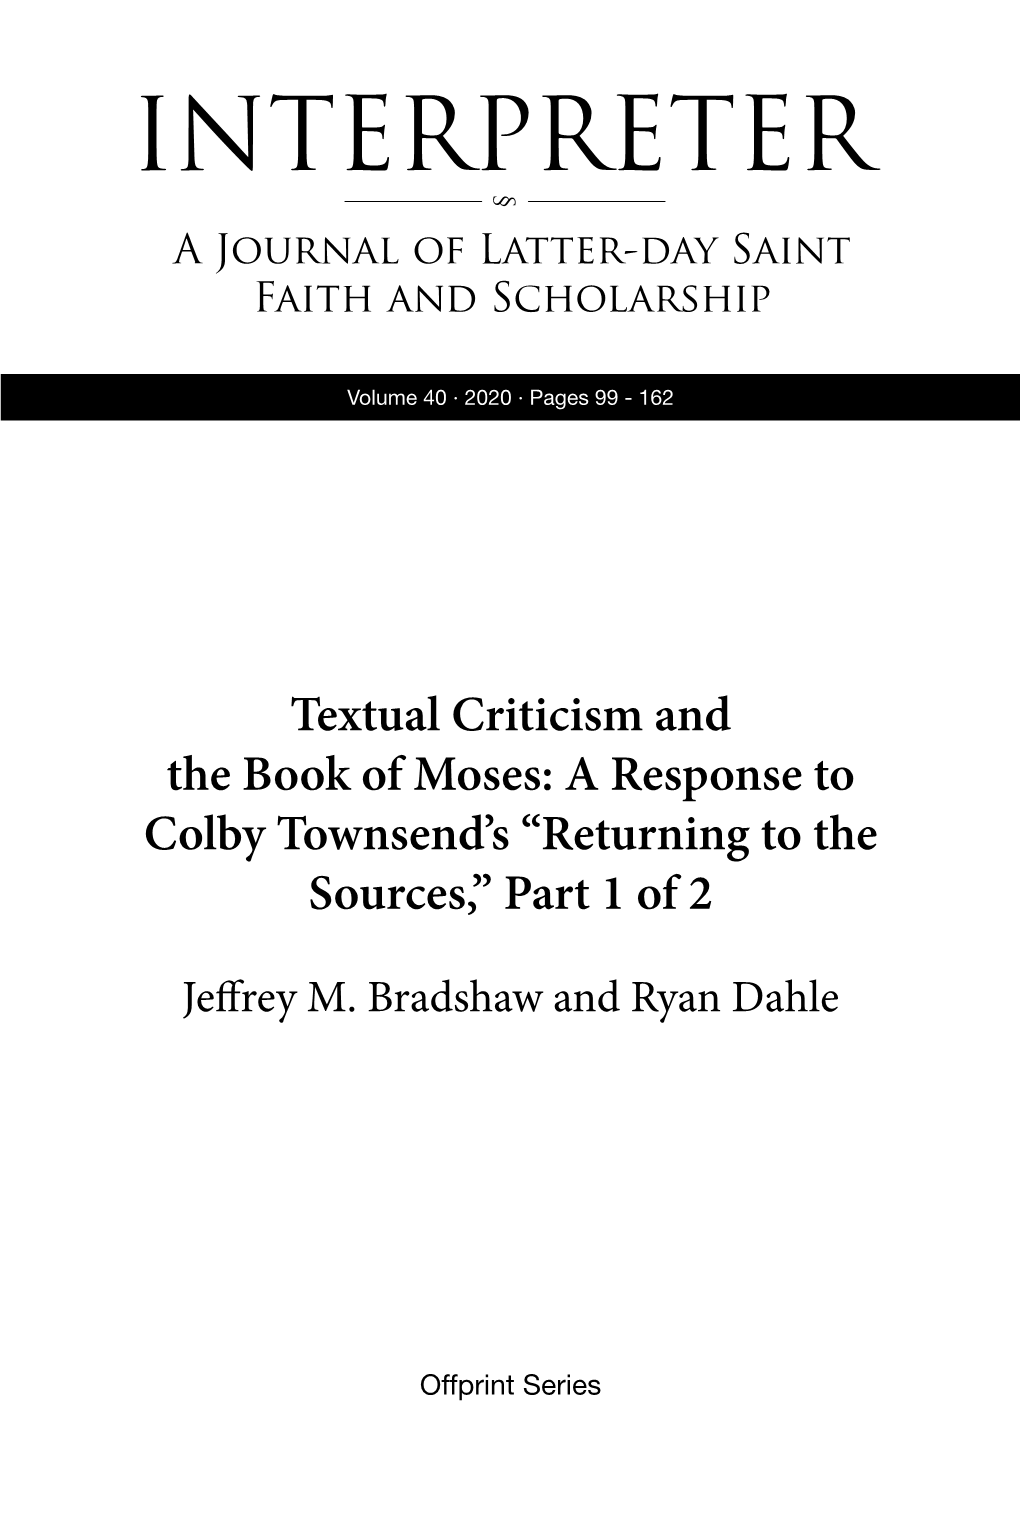 Textual Criticism and the Book of Moses: a Response to Colby Townsend’S “Returning to the Sources,” Part 1 of 2